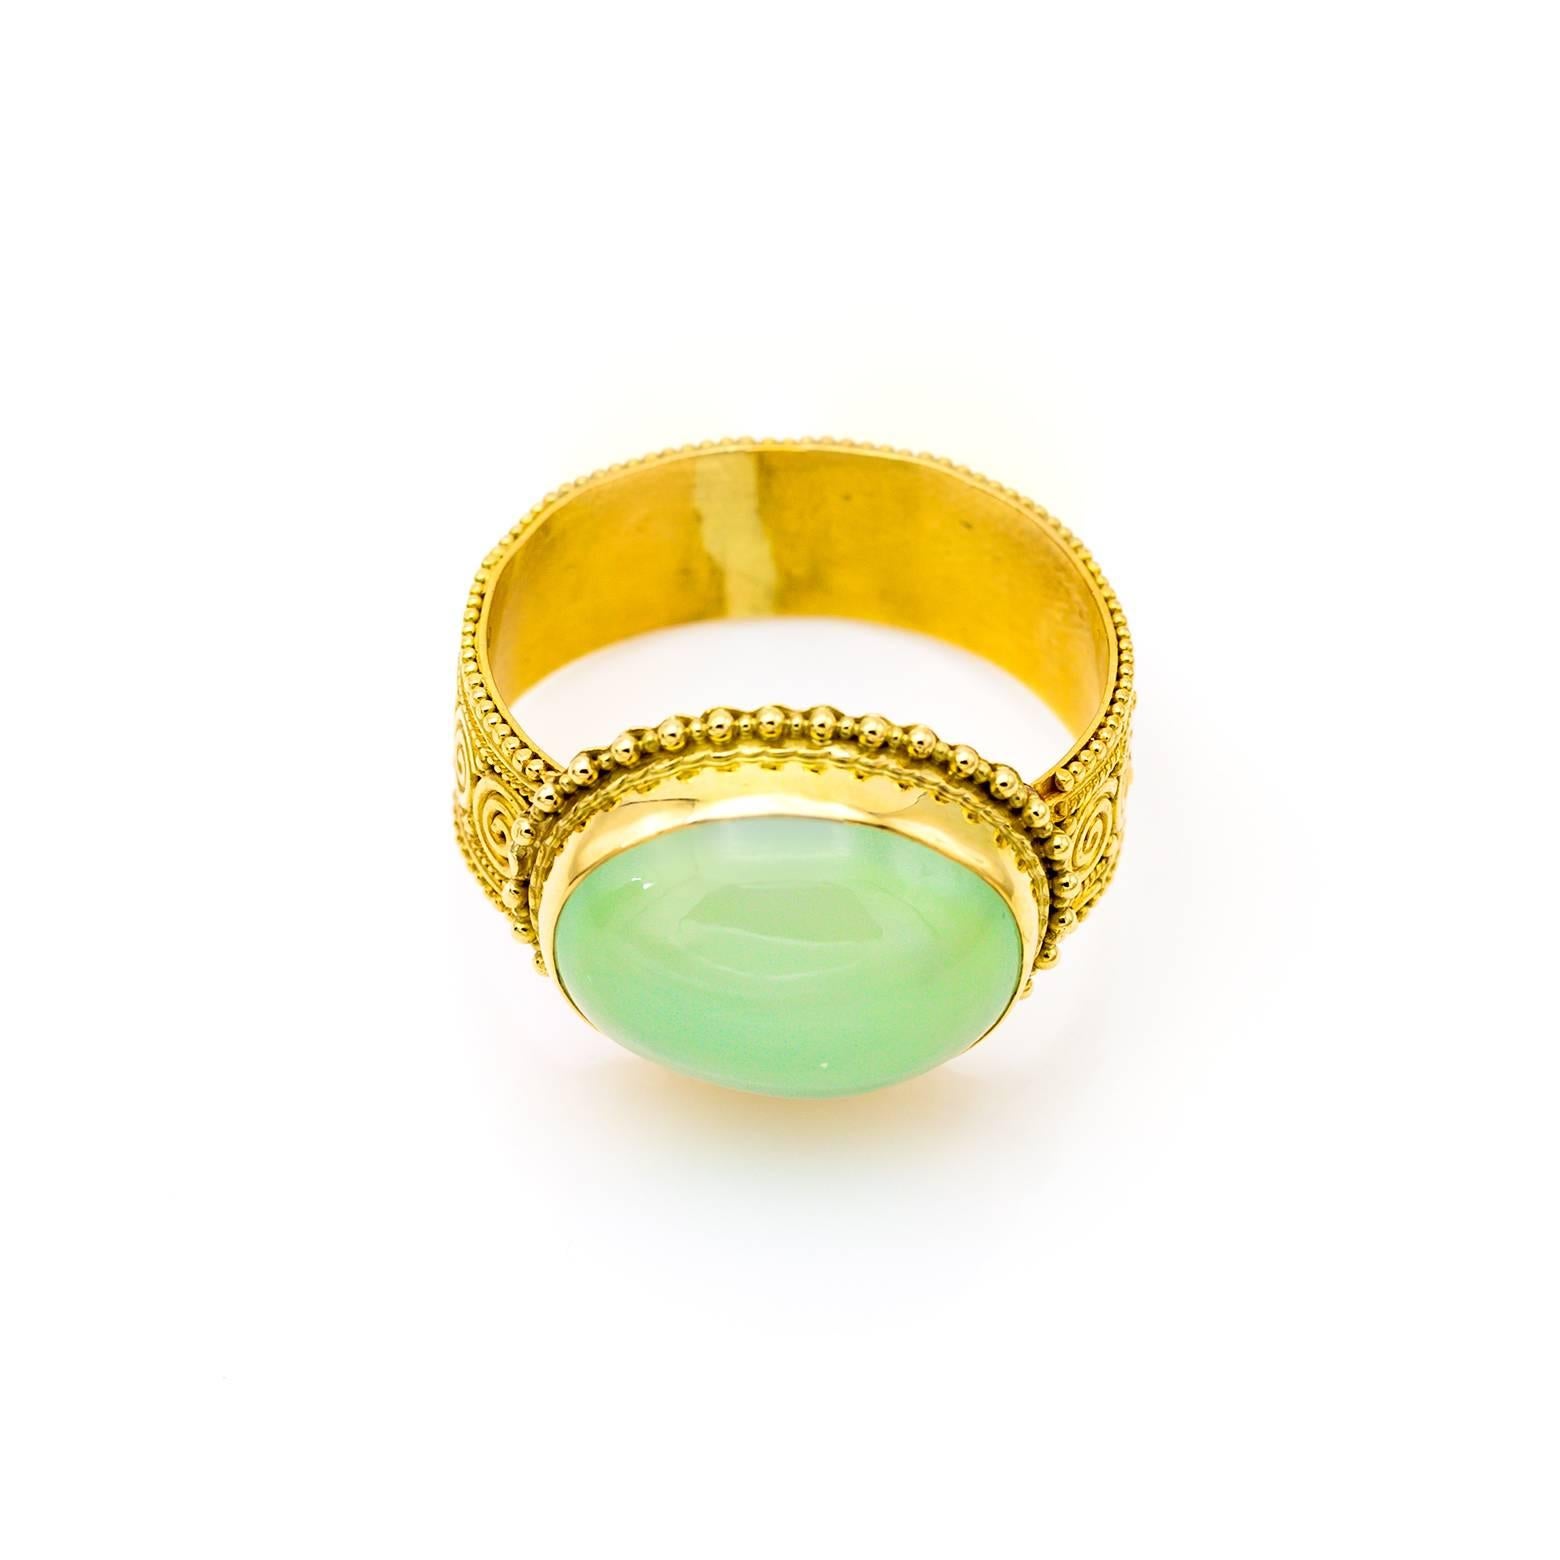 Etruscan Revival Chalcedony and 22 Karat Yellow Gold Granular Statement Ring